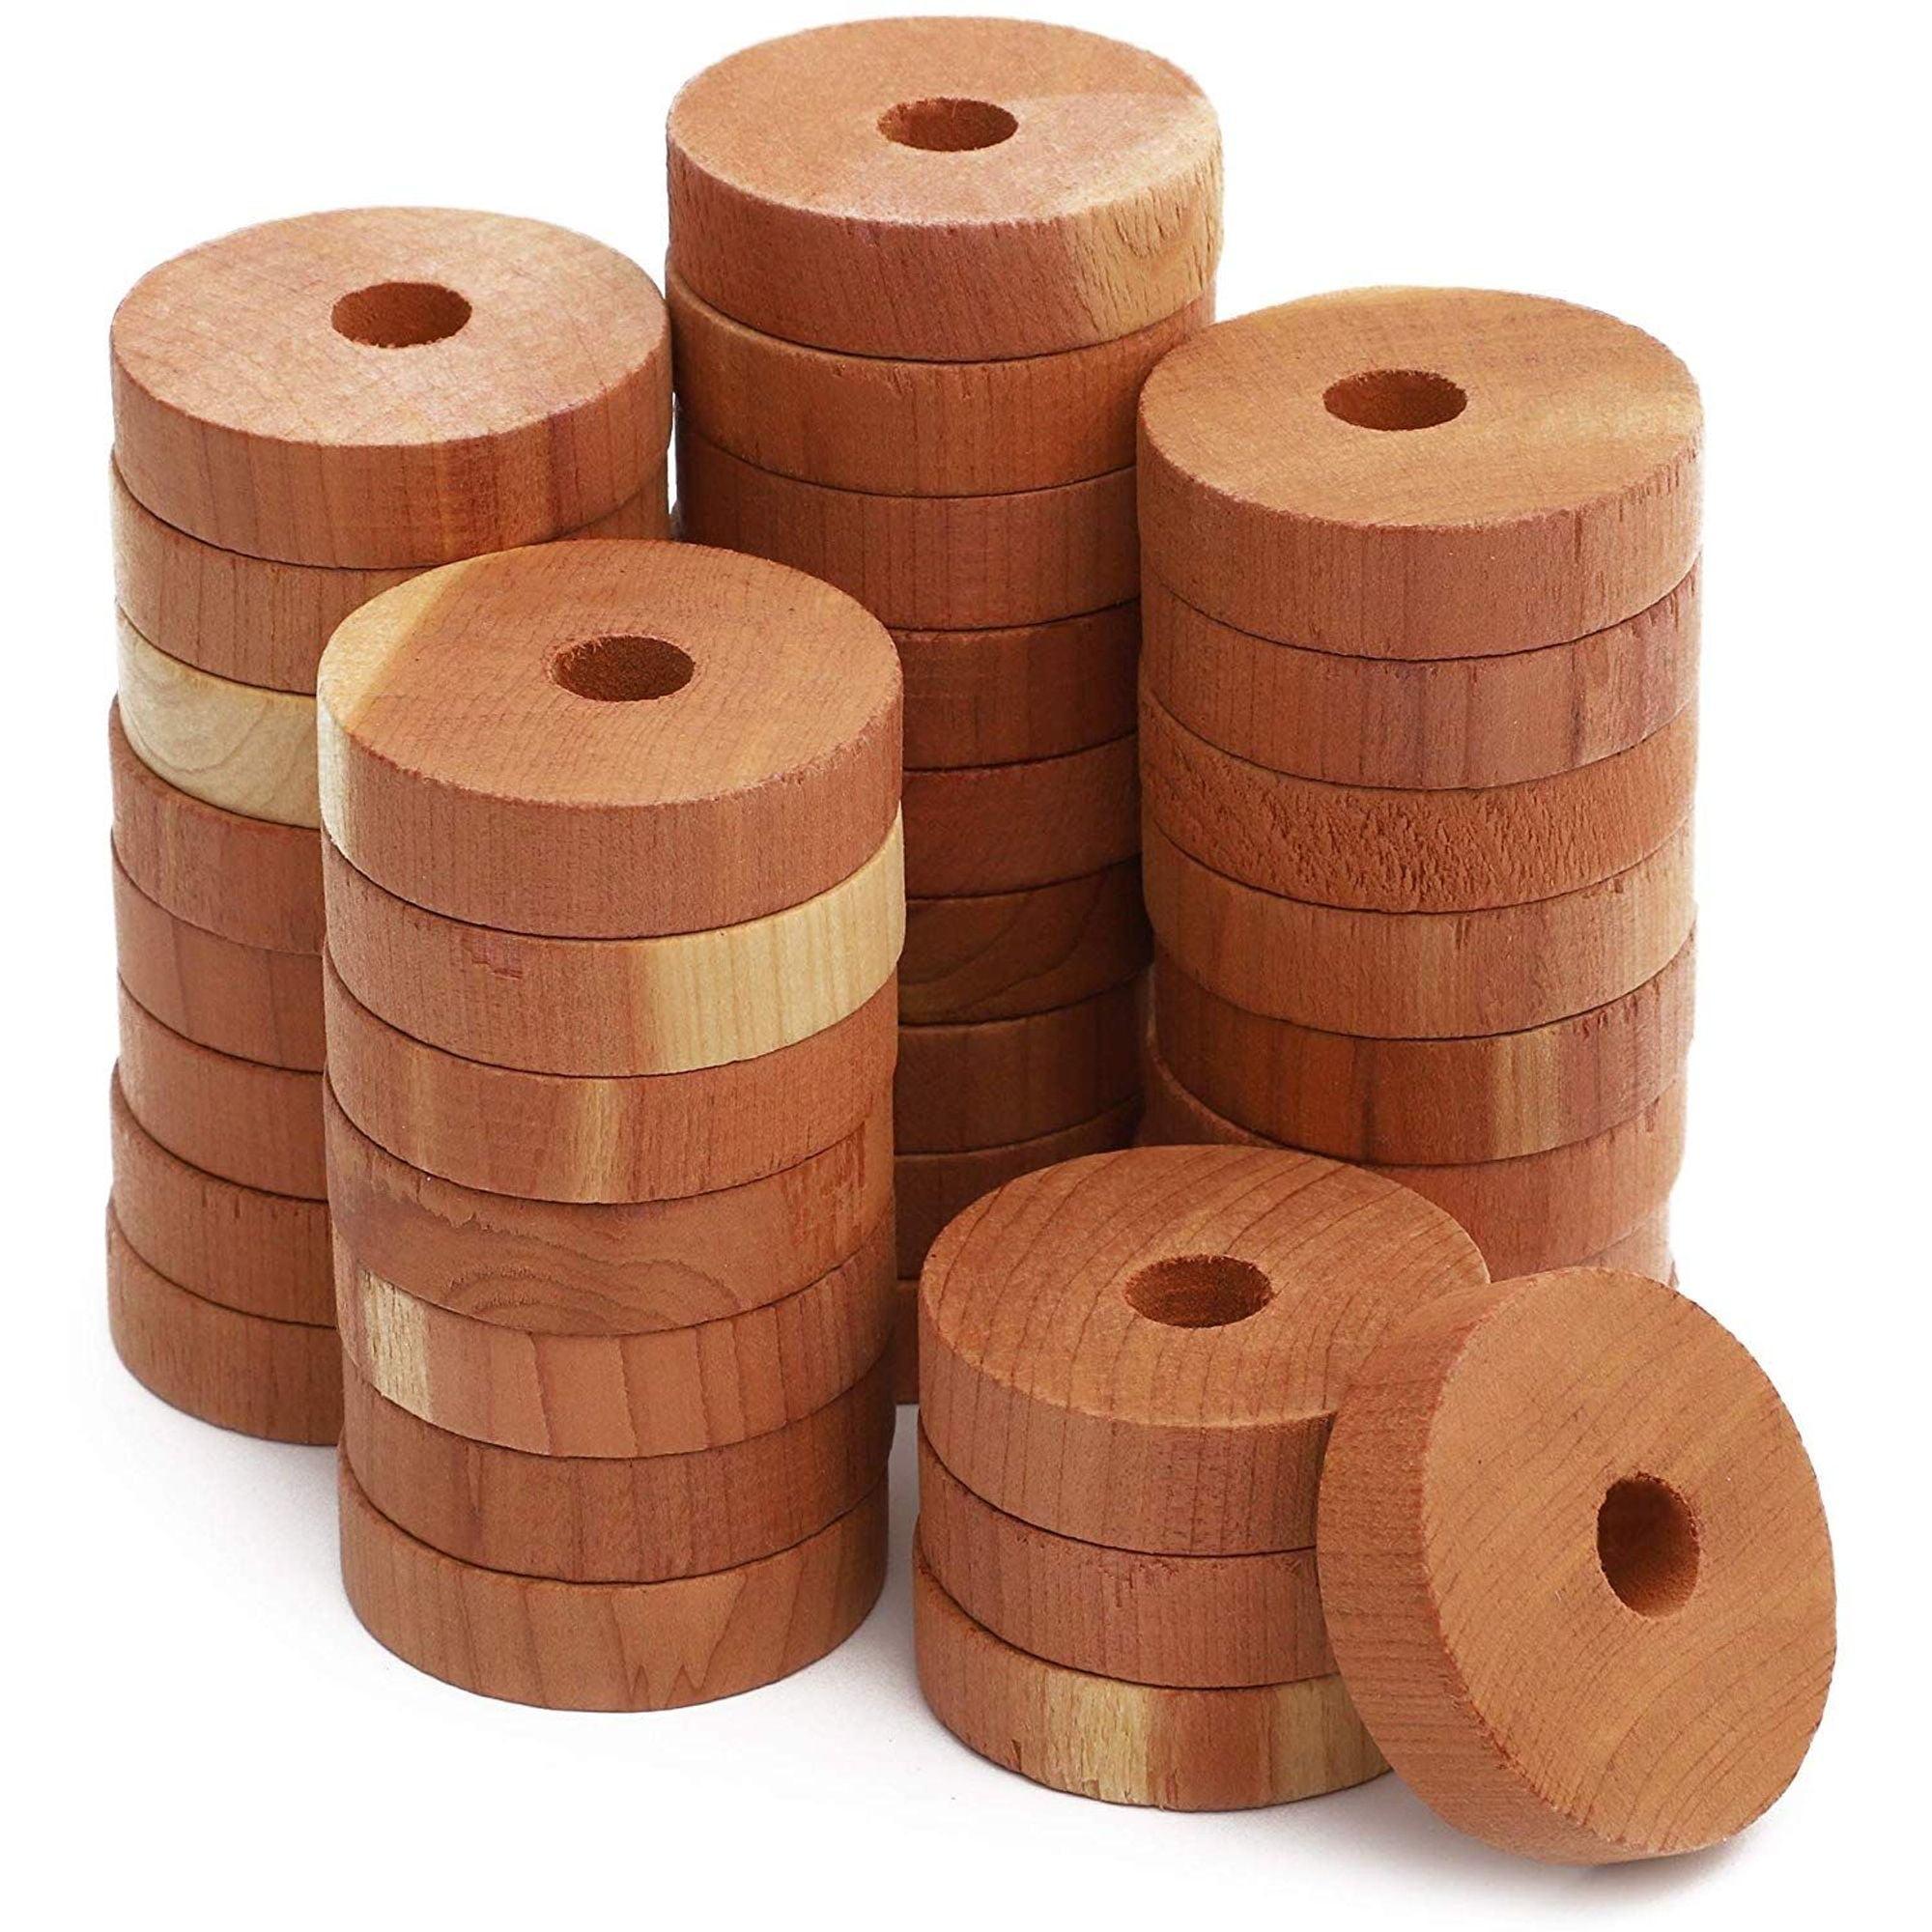 36 Pack 100% Natural Red Cedar Wood Rings (1.5 x 1.5 x 0.3 inches) for ...